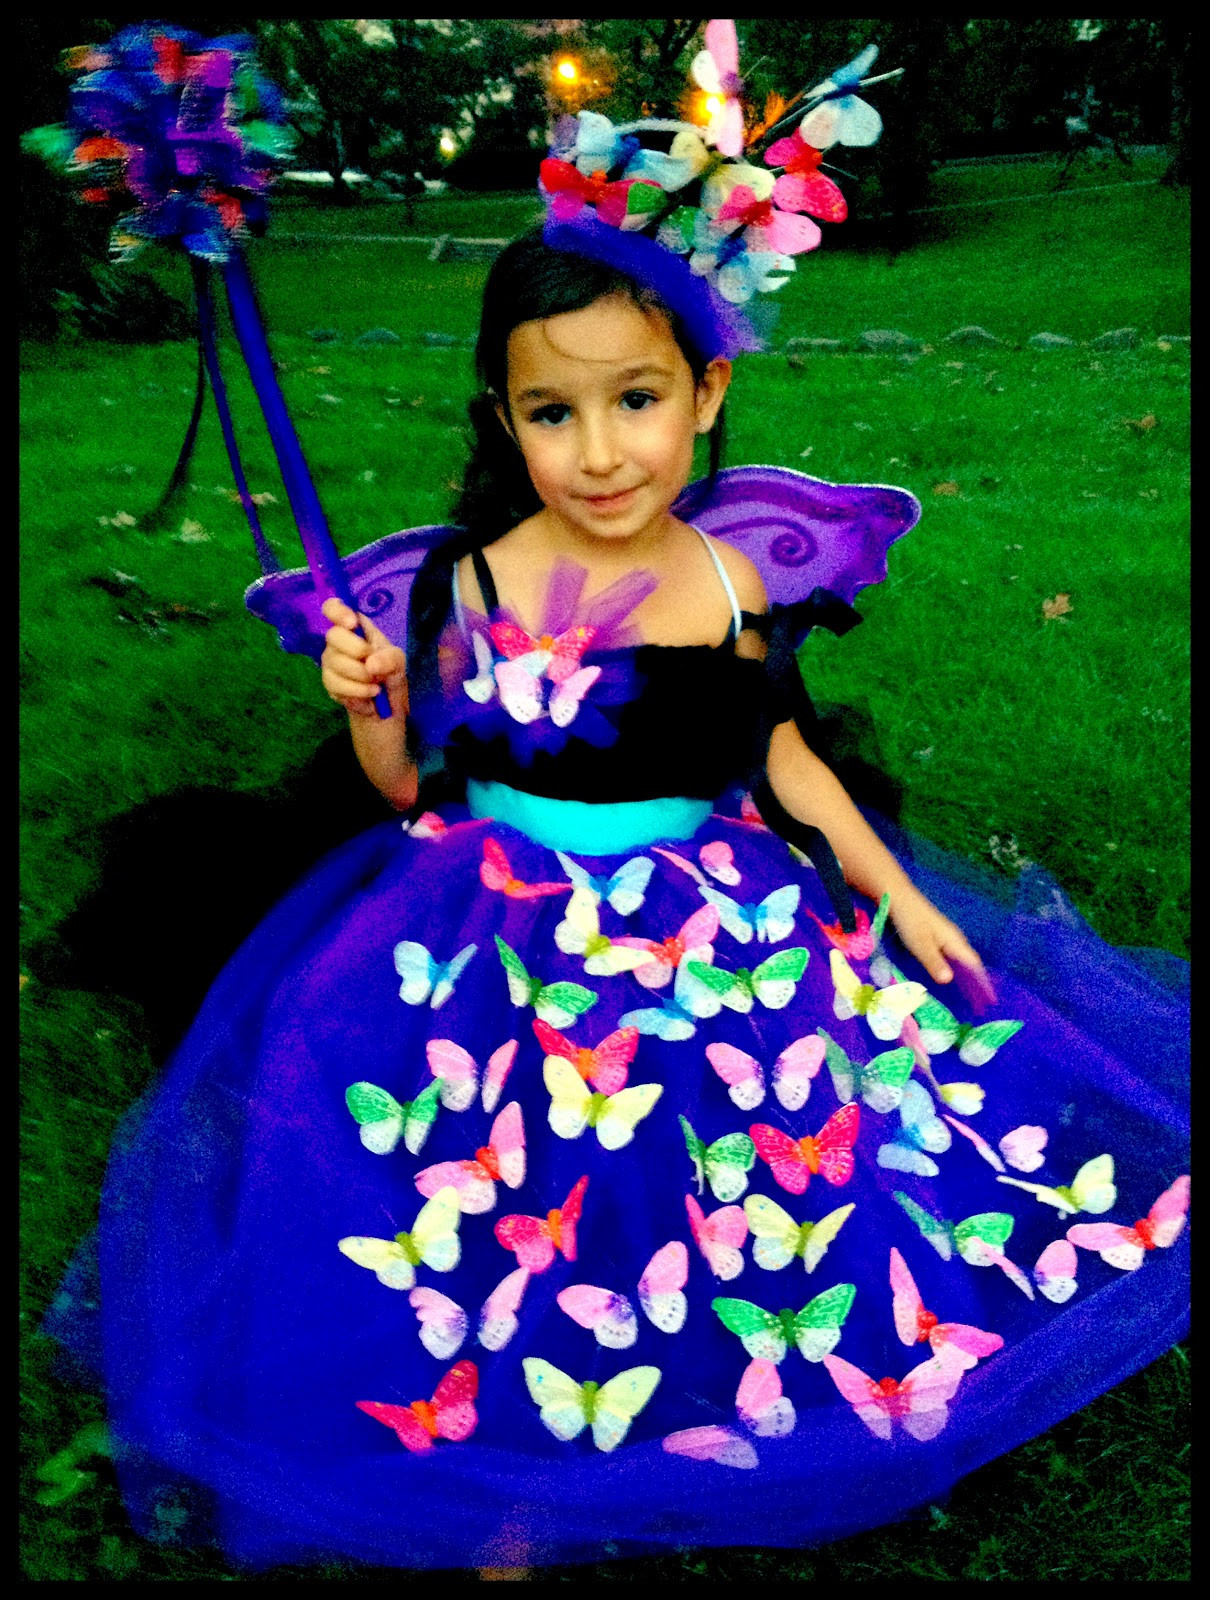 DIY Butterfly Costume
 DIY Halloween Costumes for Kids